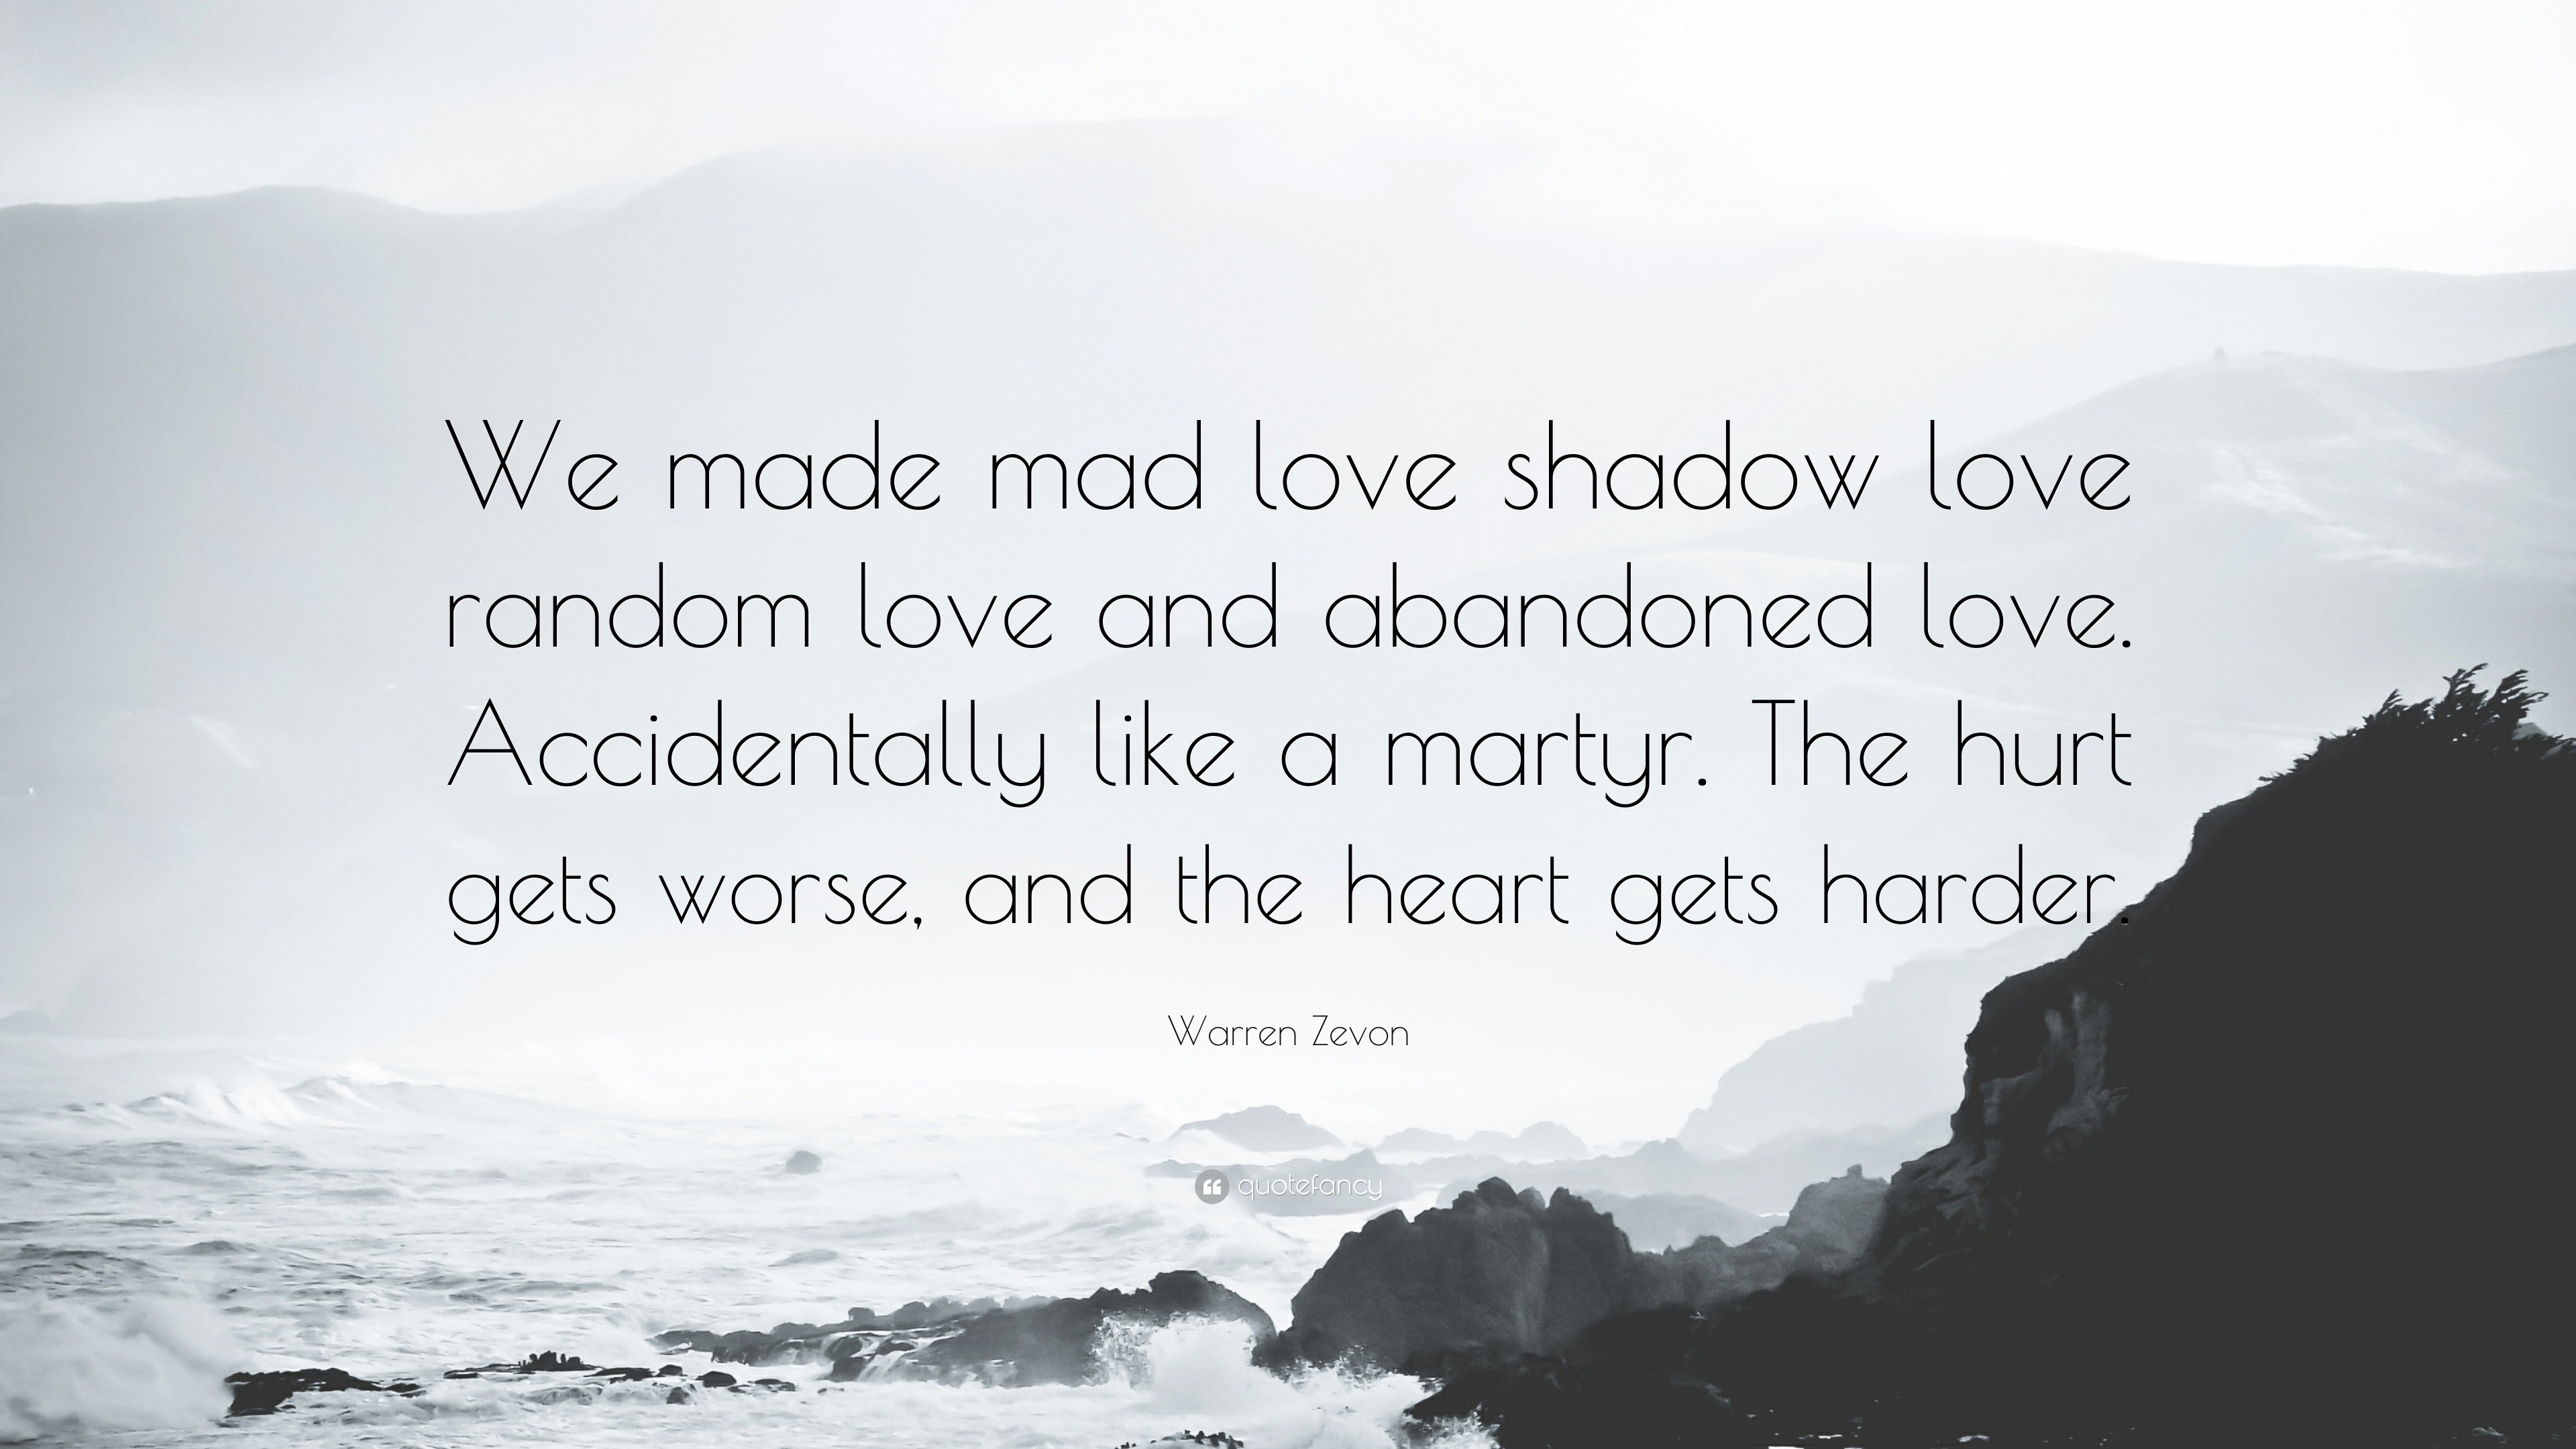 Warren Zevon Quote “We made mad love shadow love random love and abandoned love